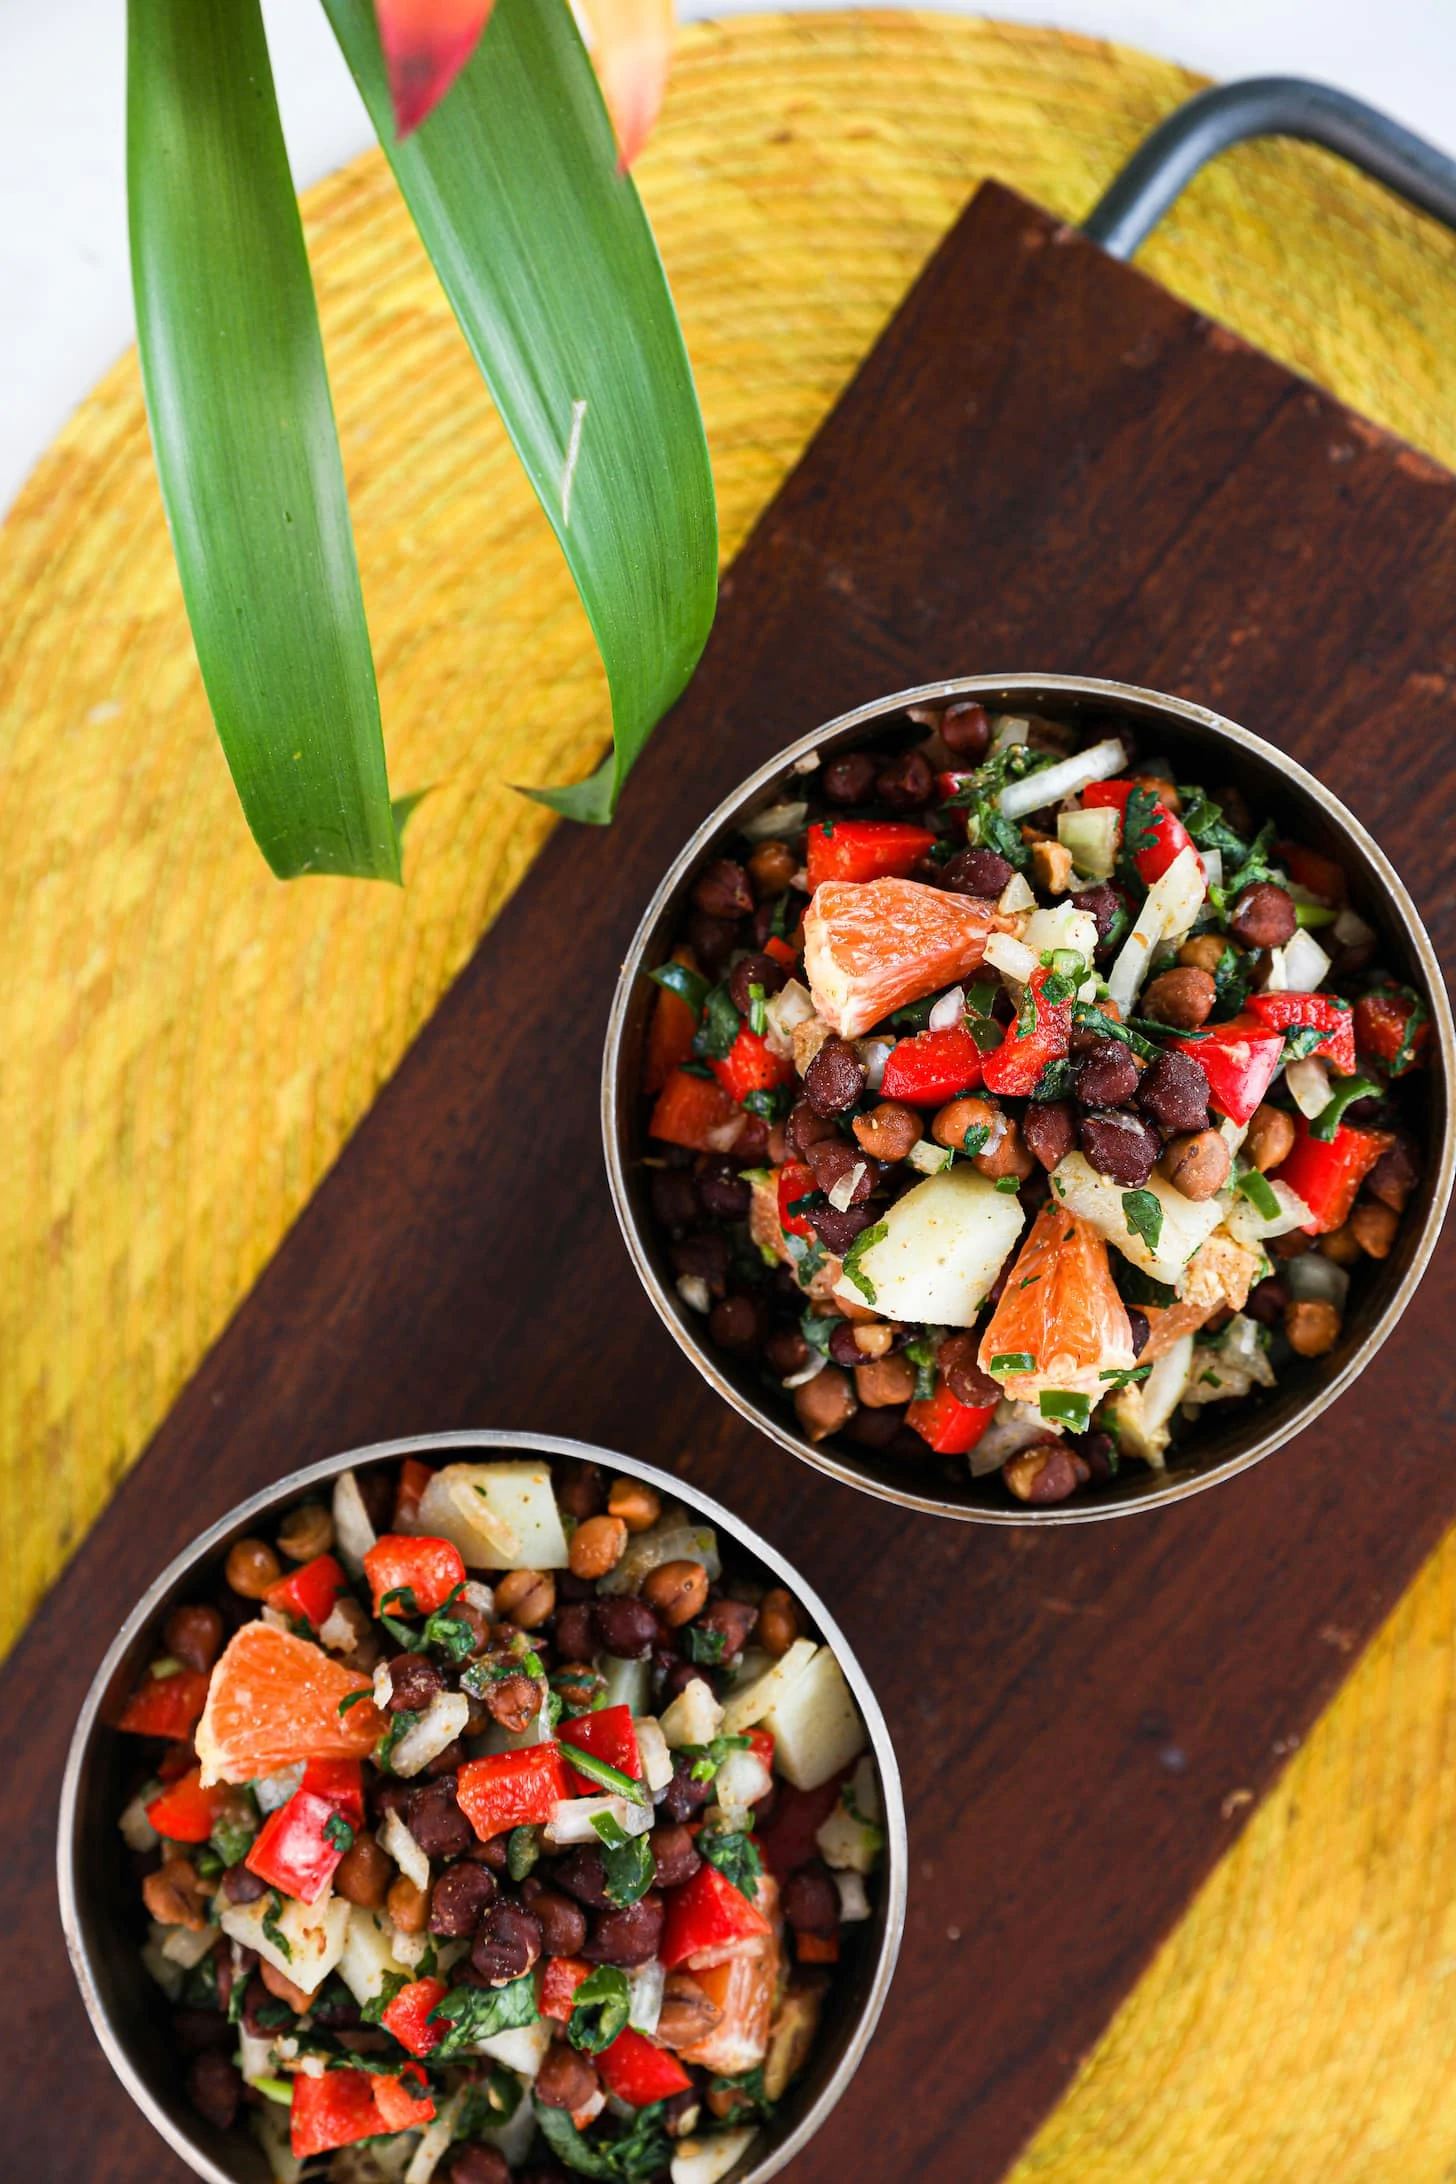 Overhead shot of two bowls of black chickpeas salad with orange cubes, peppers, potatoes and onion placed on a wooden board.